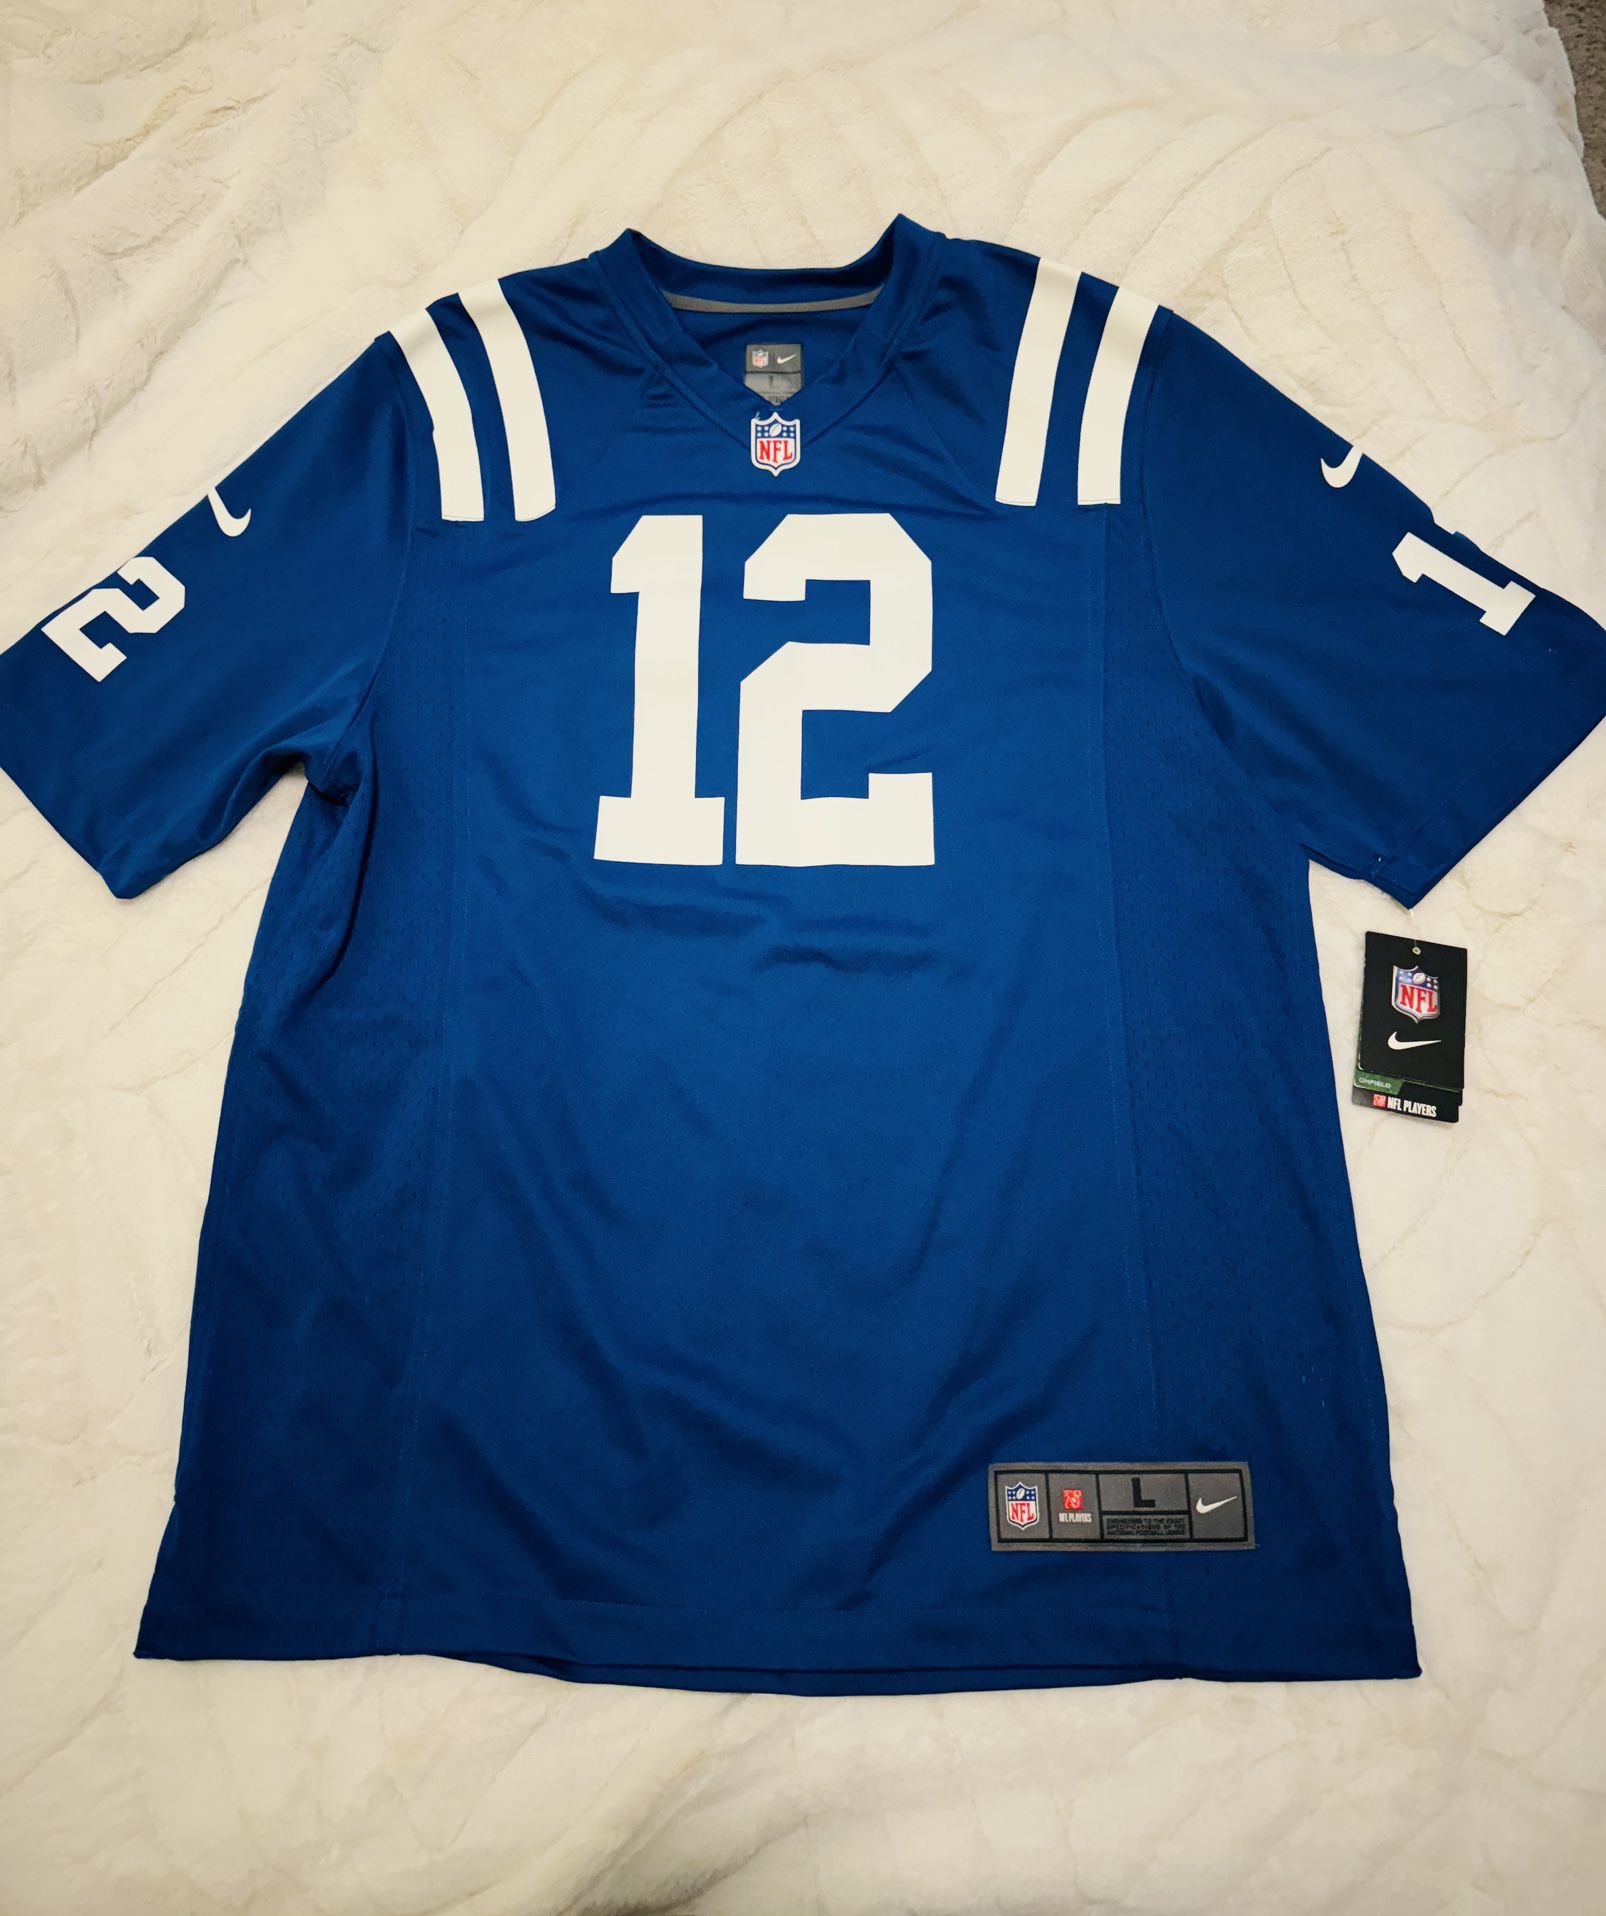 NFL Jersey's for sale